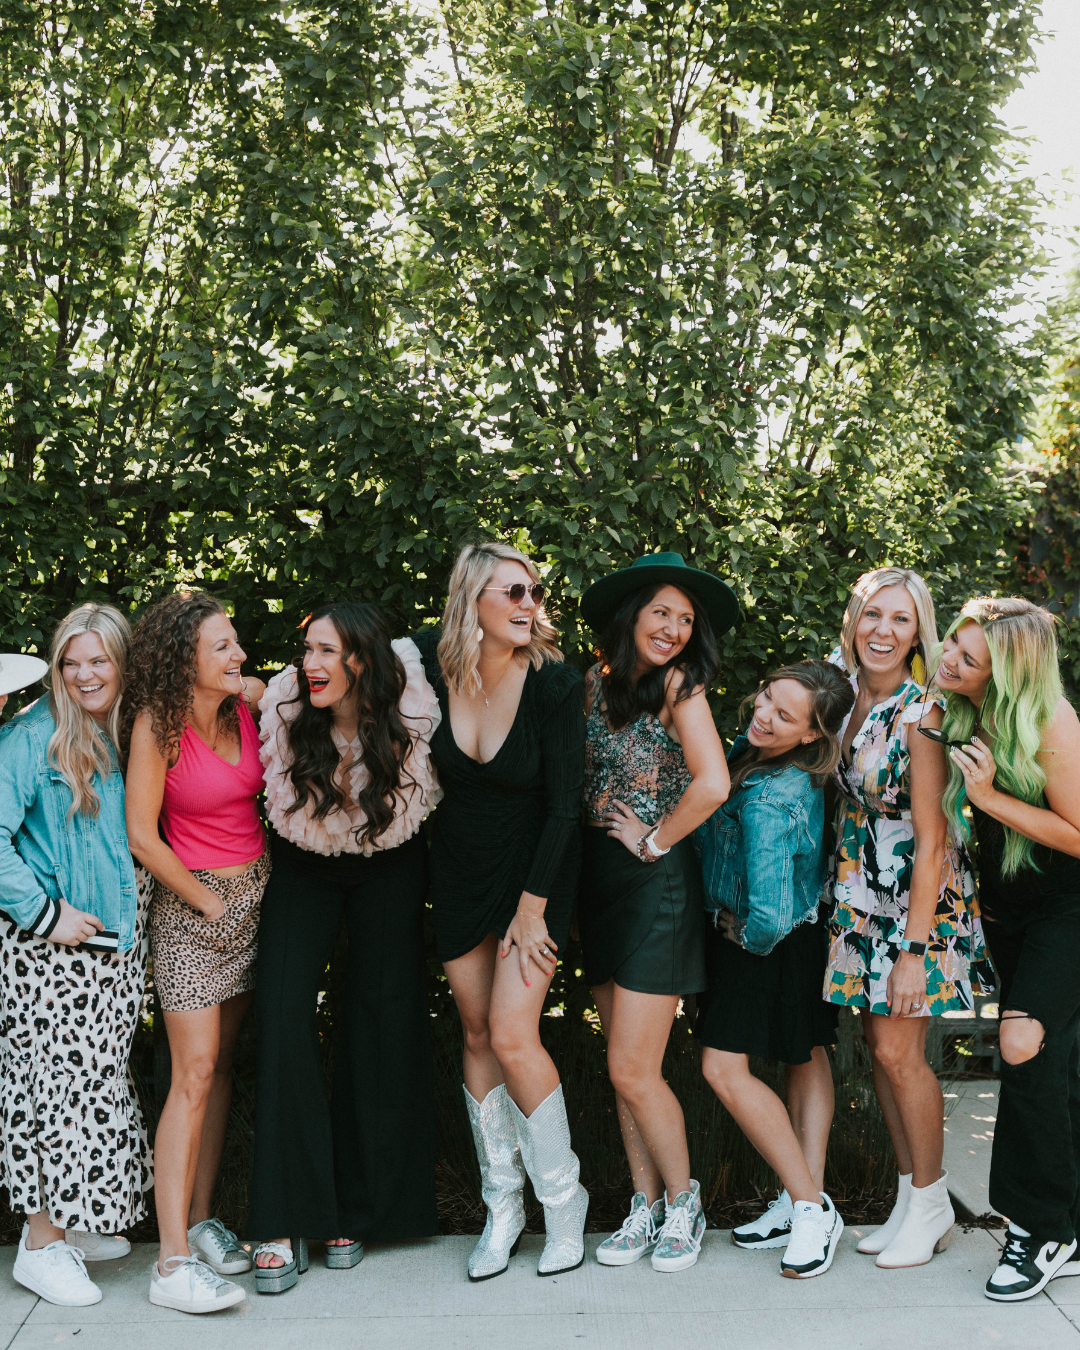 How to make internet friends your real friends; group of girls dressed up, laughing together